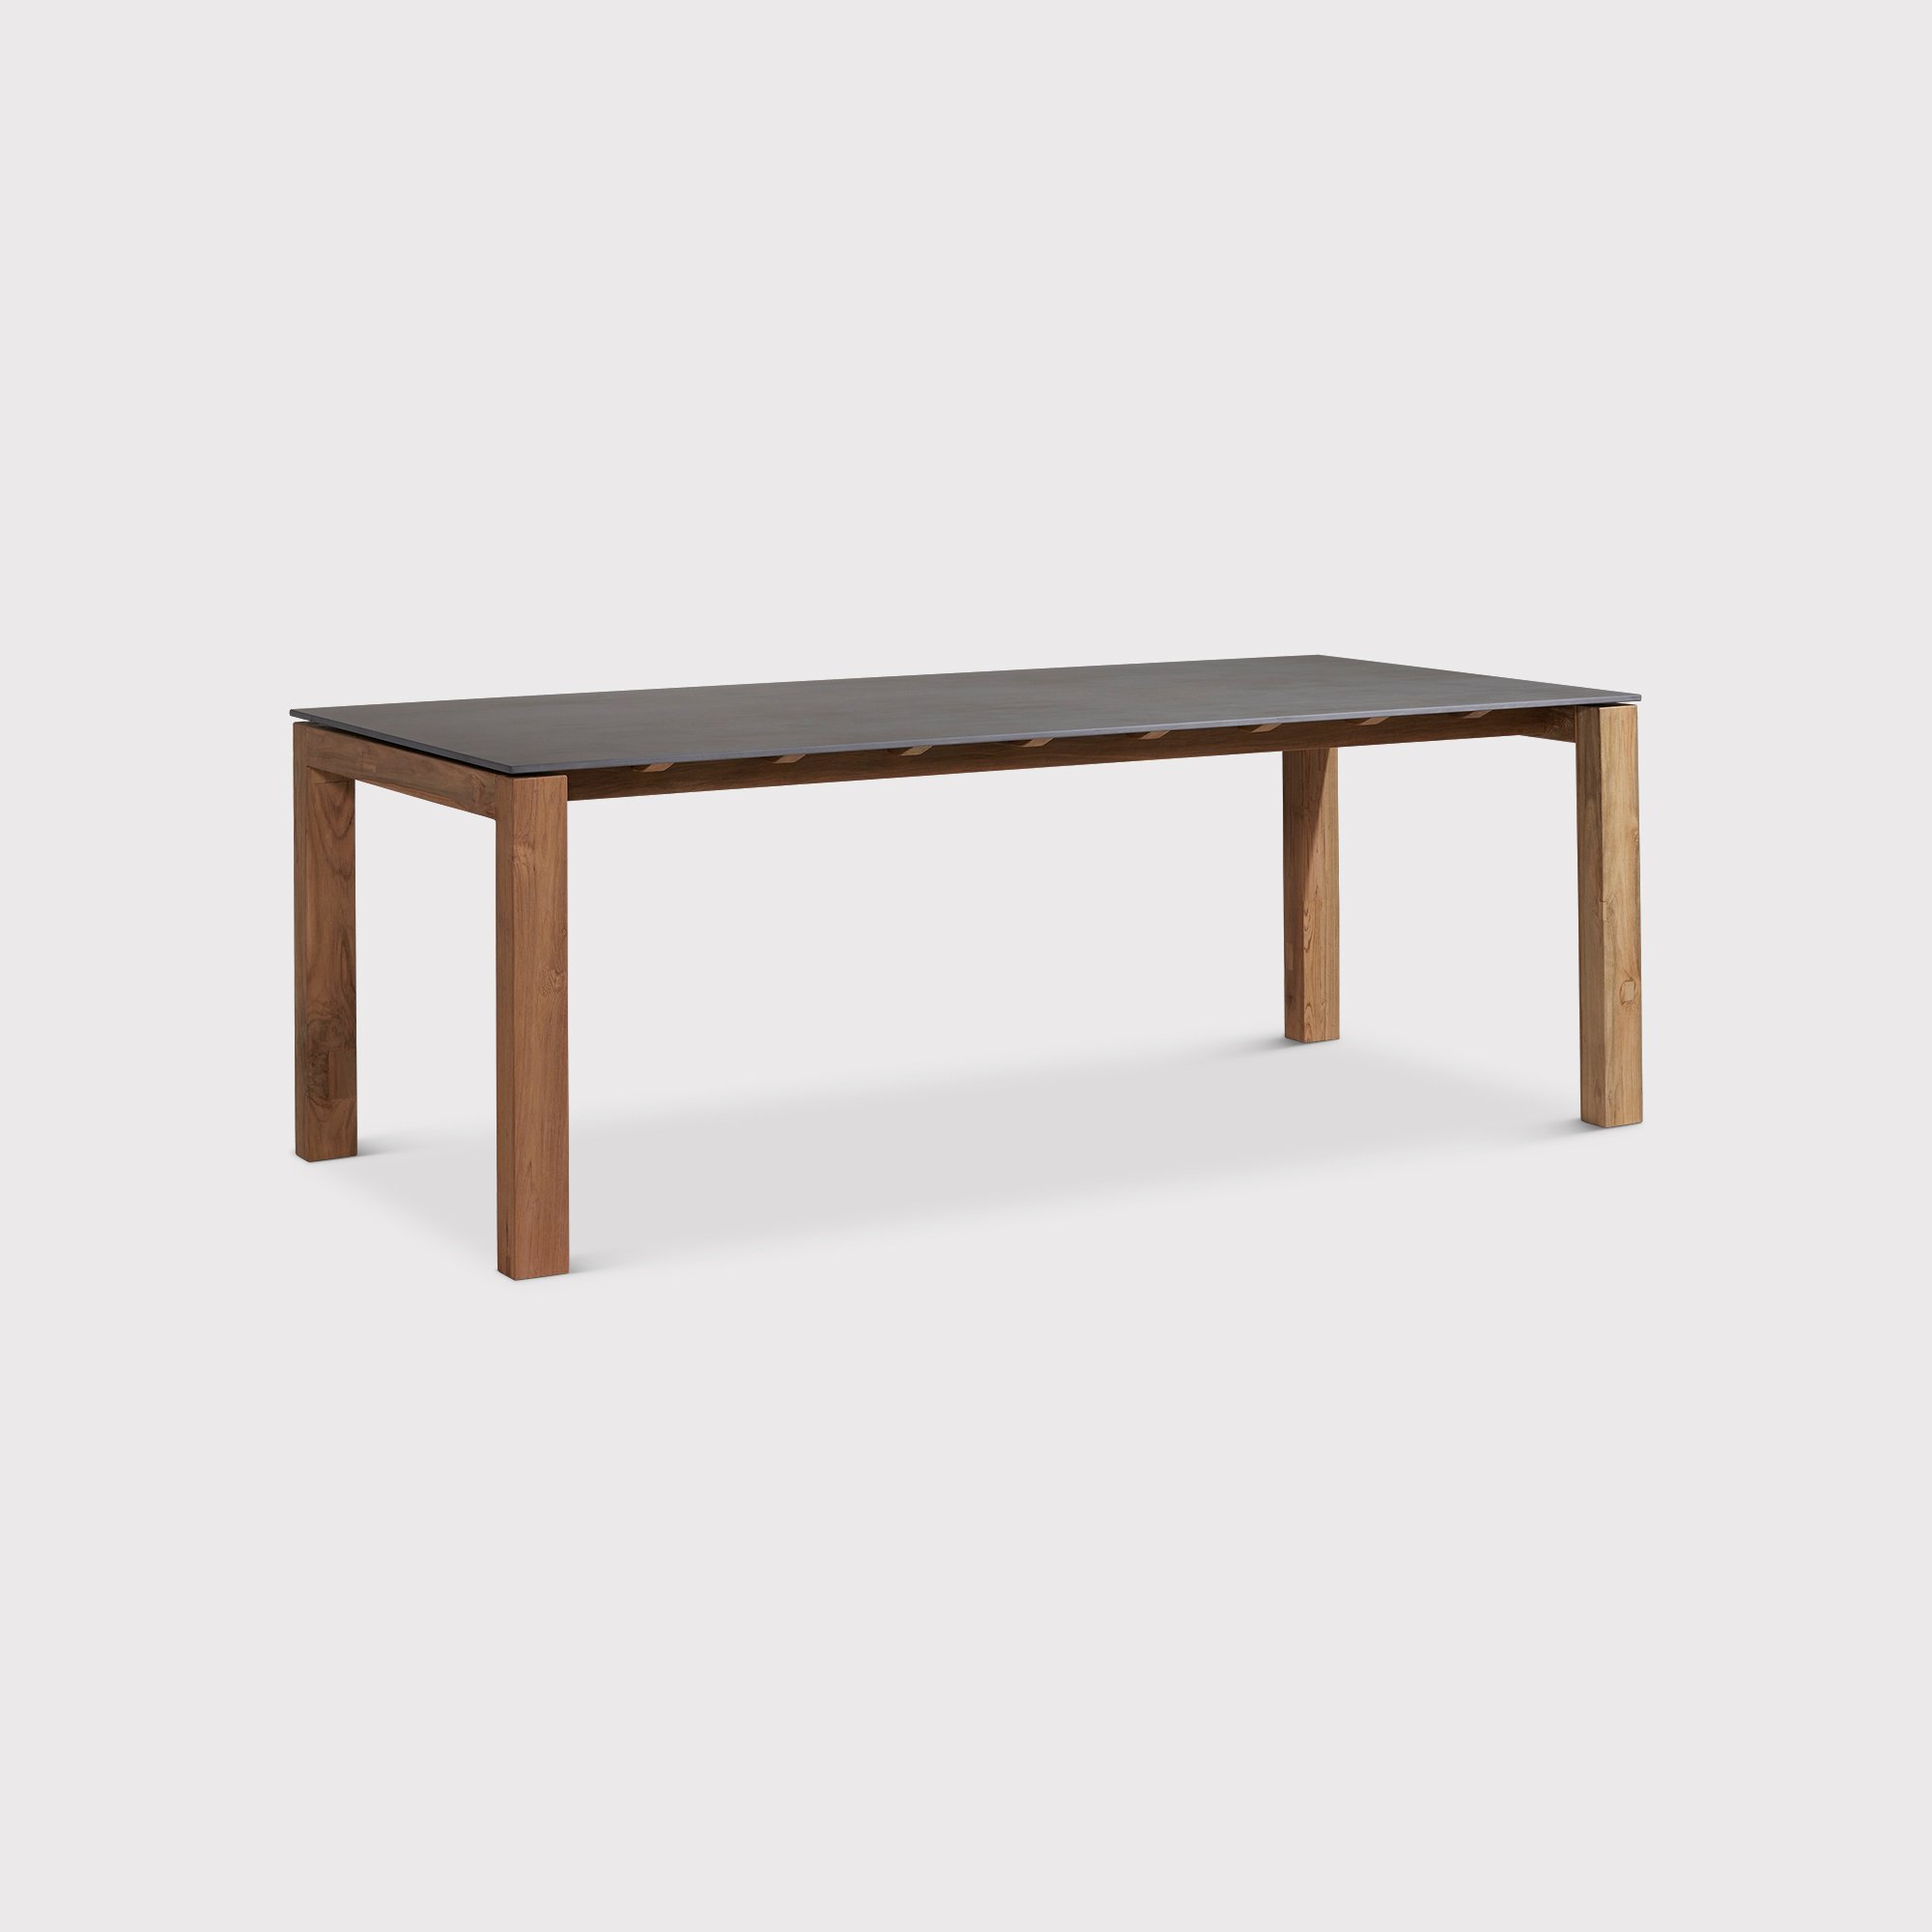 Photo of Grenada dining table 220cm in neutral